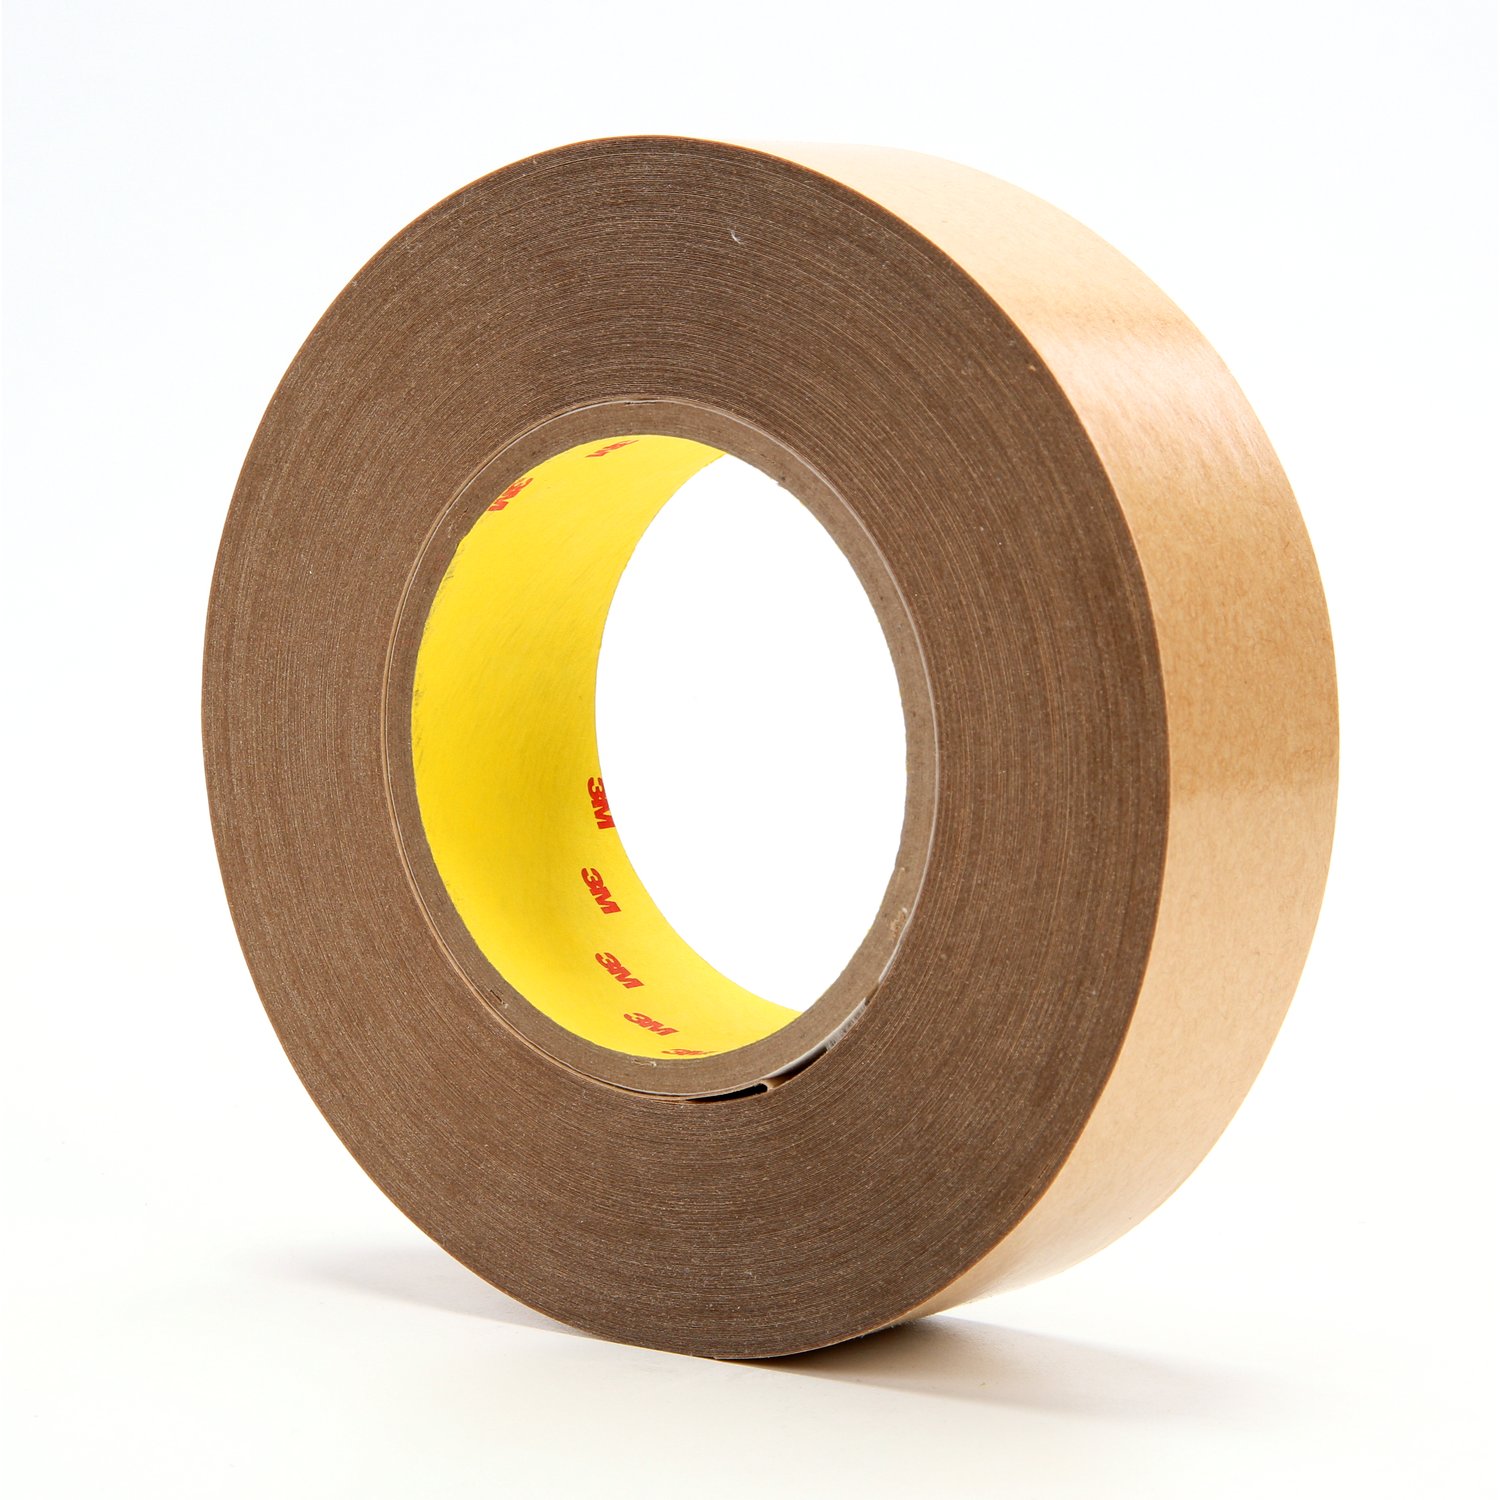 7000123449 - 3M Adhesive Transfer Tape 950, Clear, 1 1/2 in x 60 yd, 5 mil, 24 rolls
per case